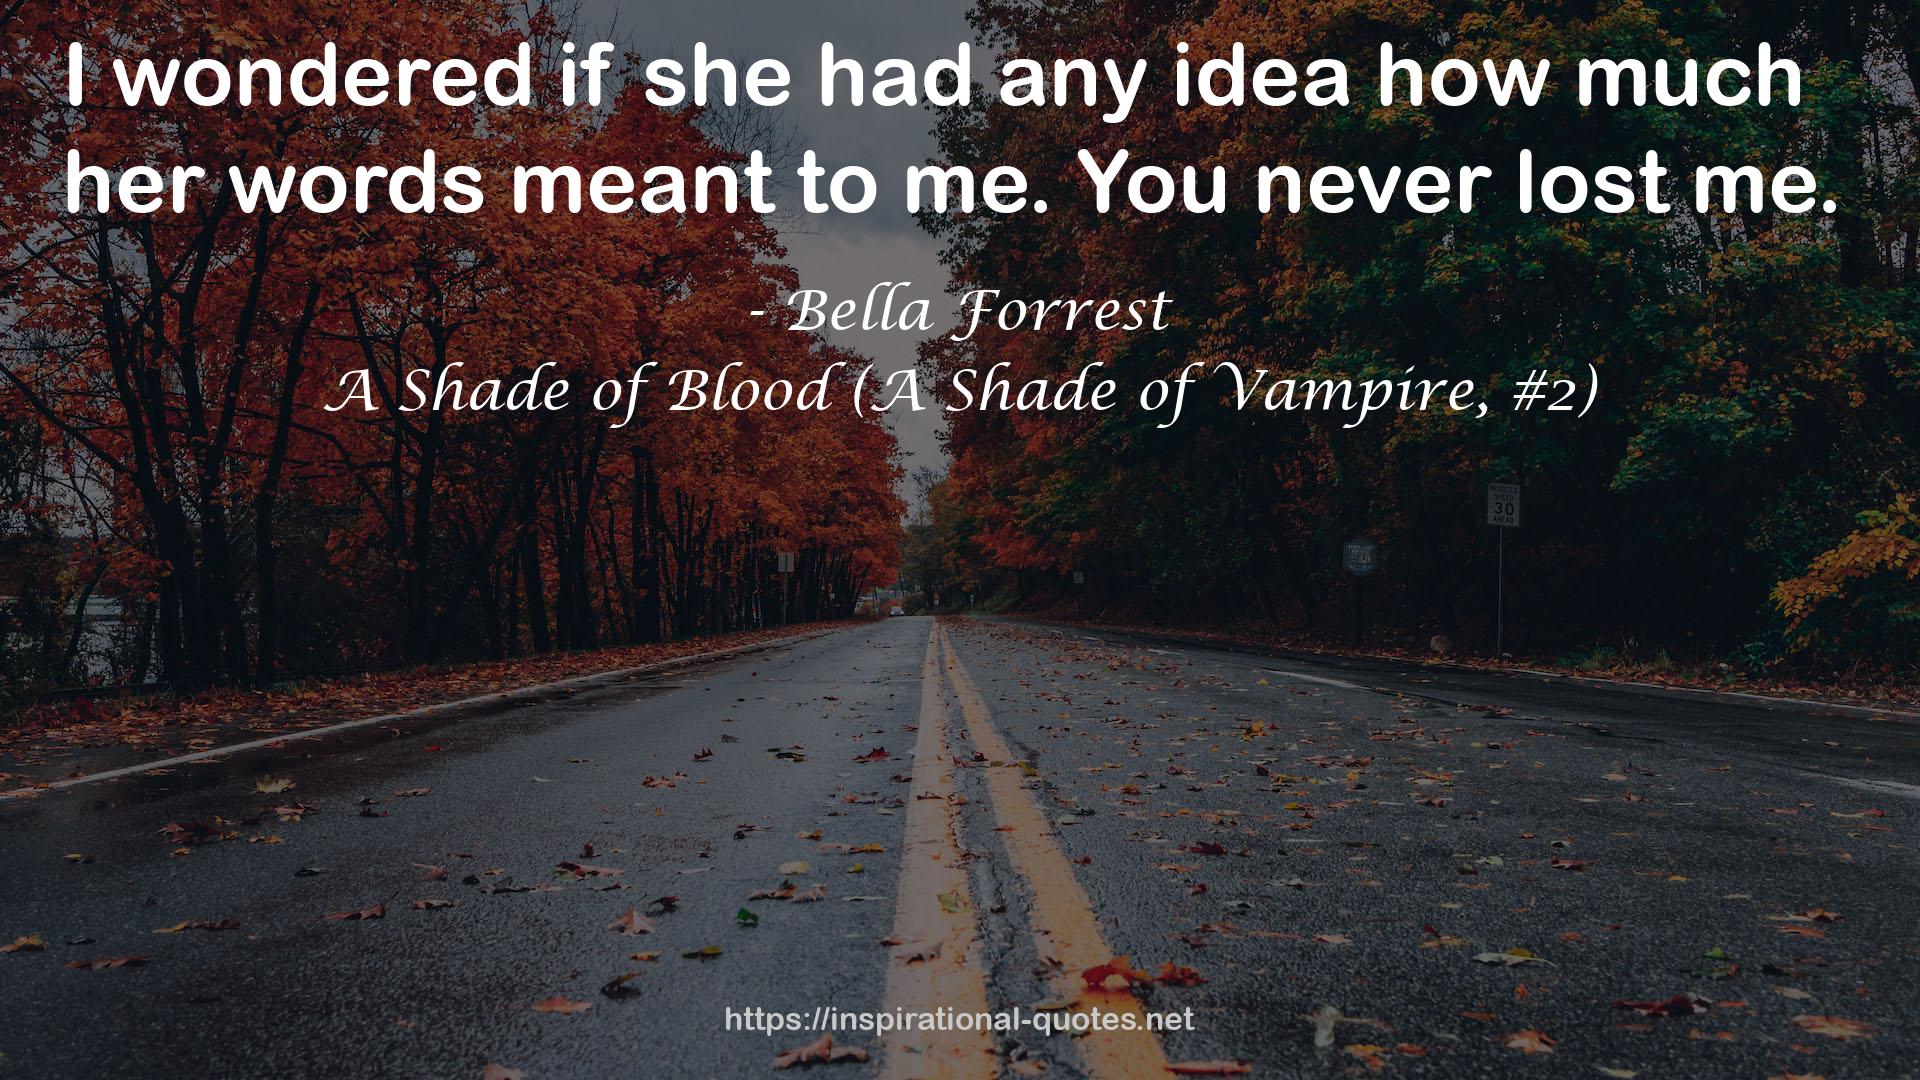 A Shade of Blood (A Shade of Vampire, #2) QUOTES